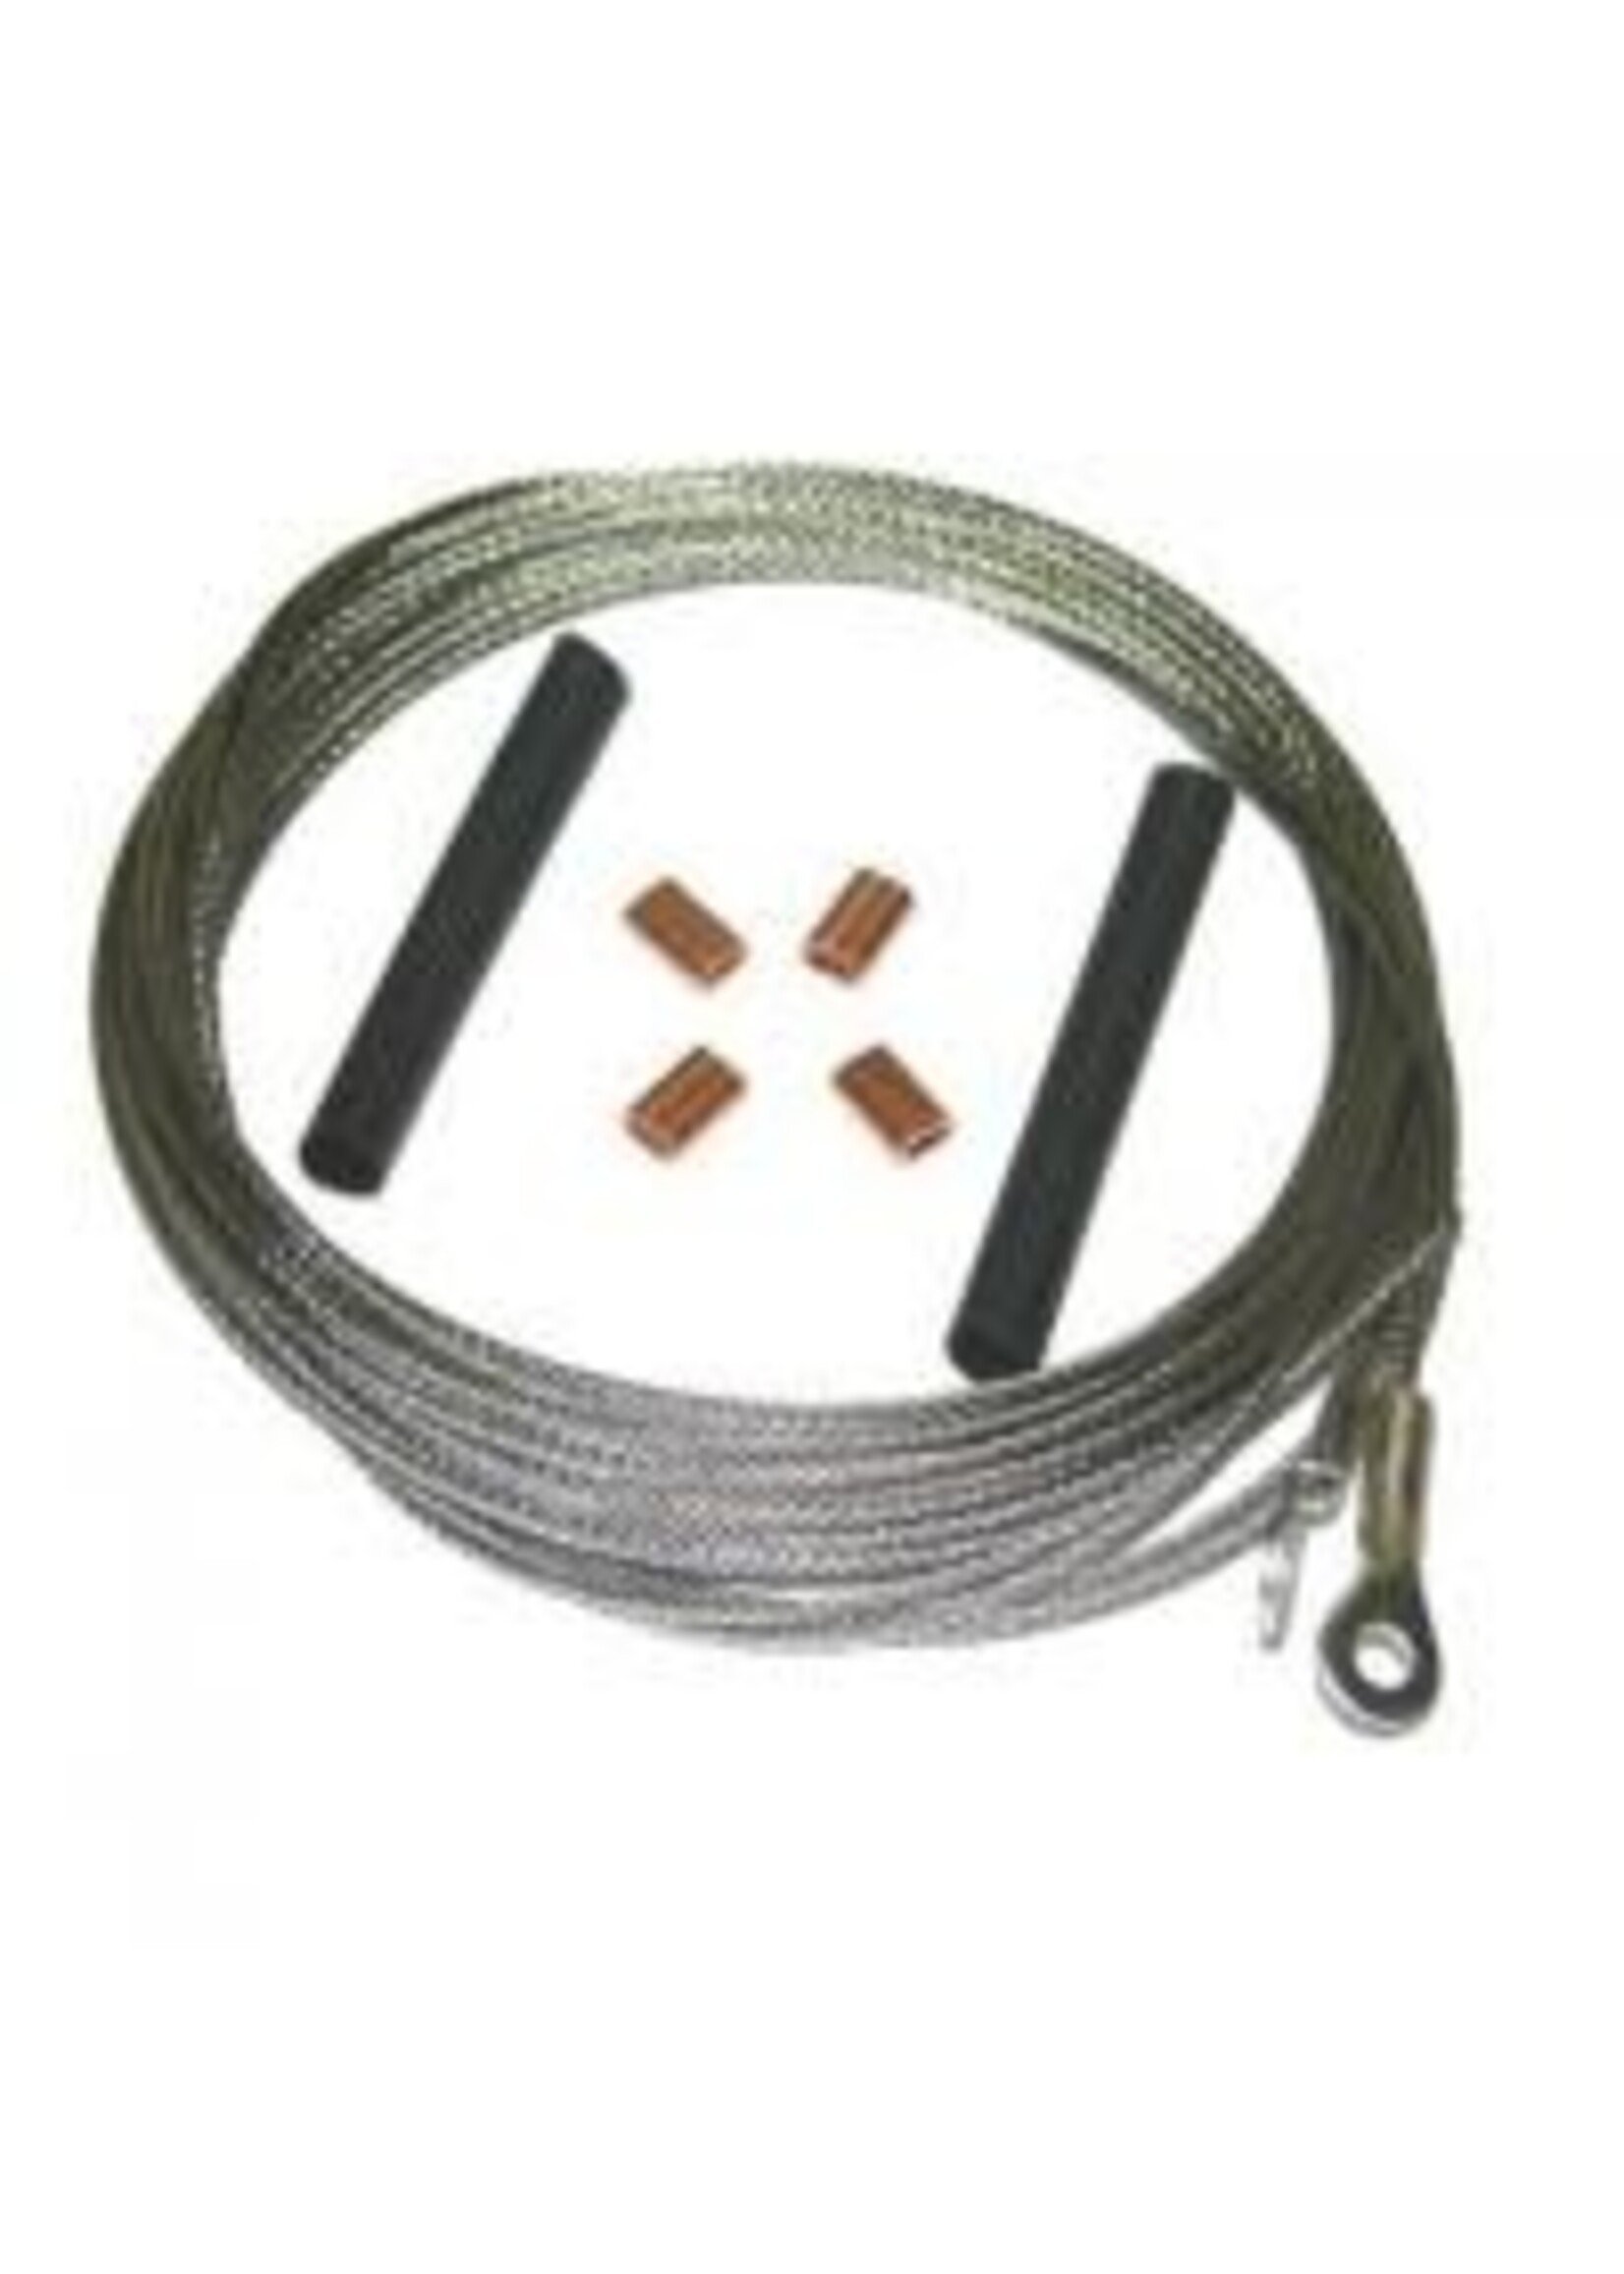 Wilderness Systems Cable Rudder SS Pkg2